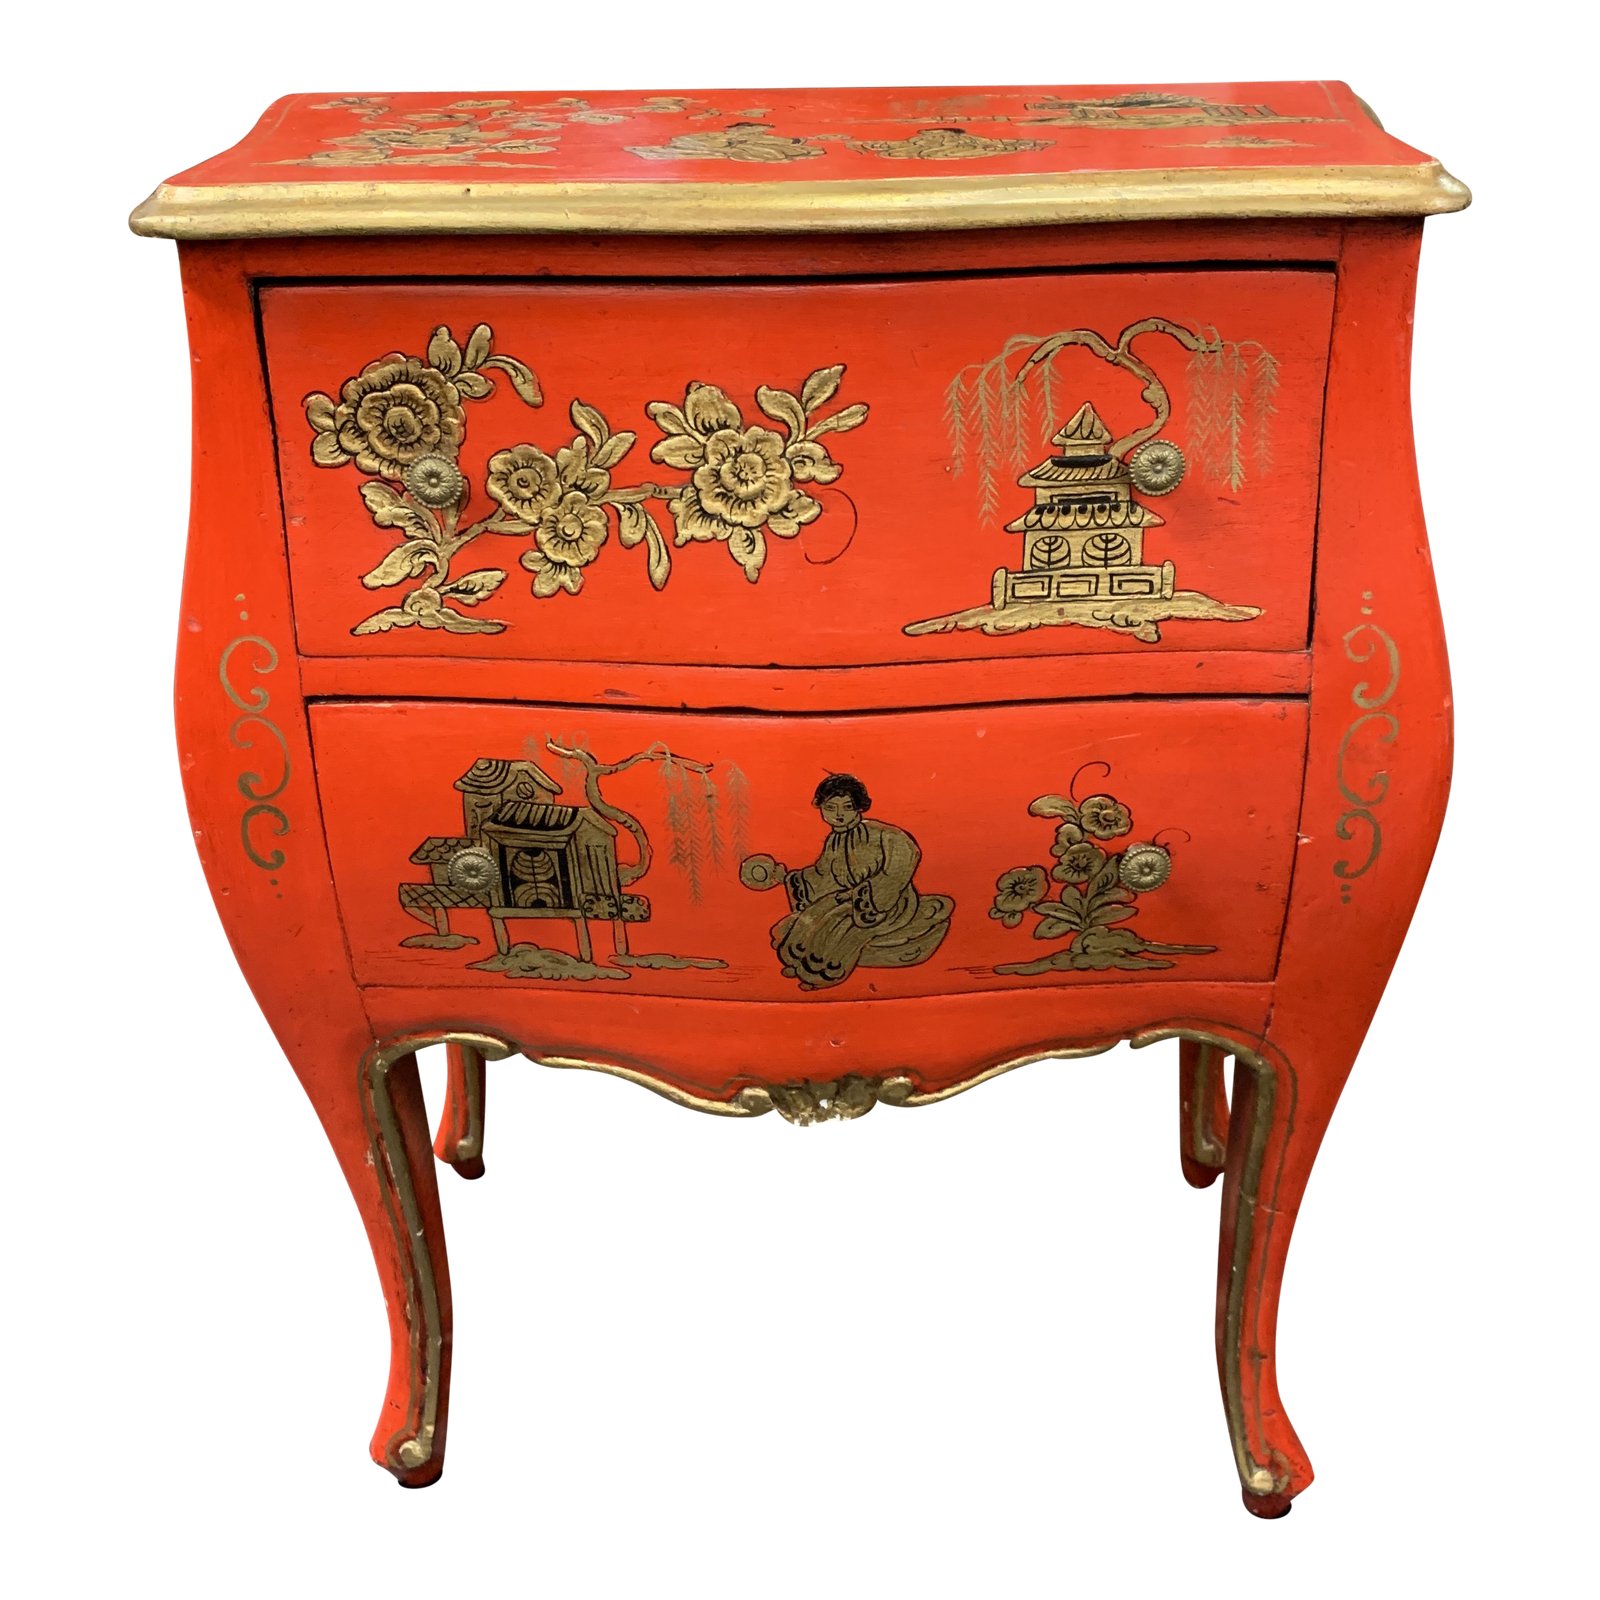 century asian red hand painted accent table chairish pottery barn kitchen sets vintage oriental lamps teak garden furniture set hall chests and cabinets bunnings outdoor grey end